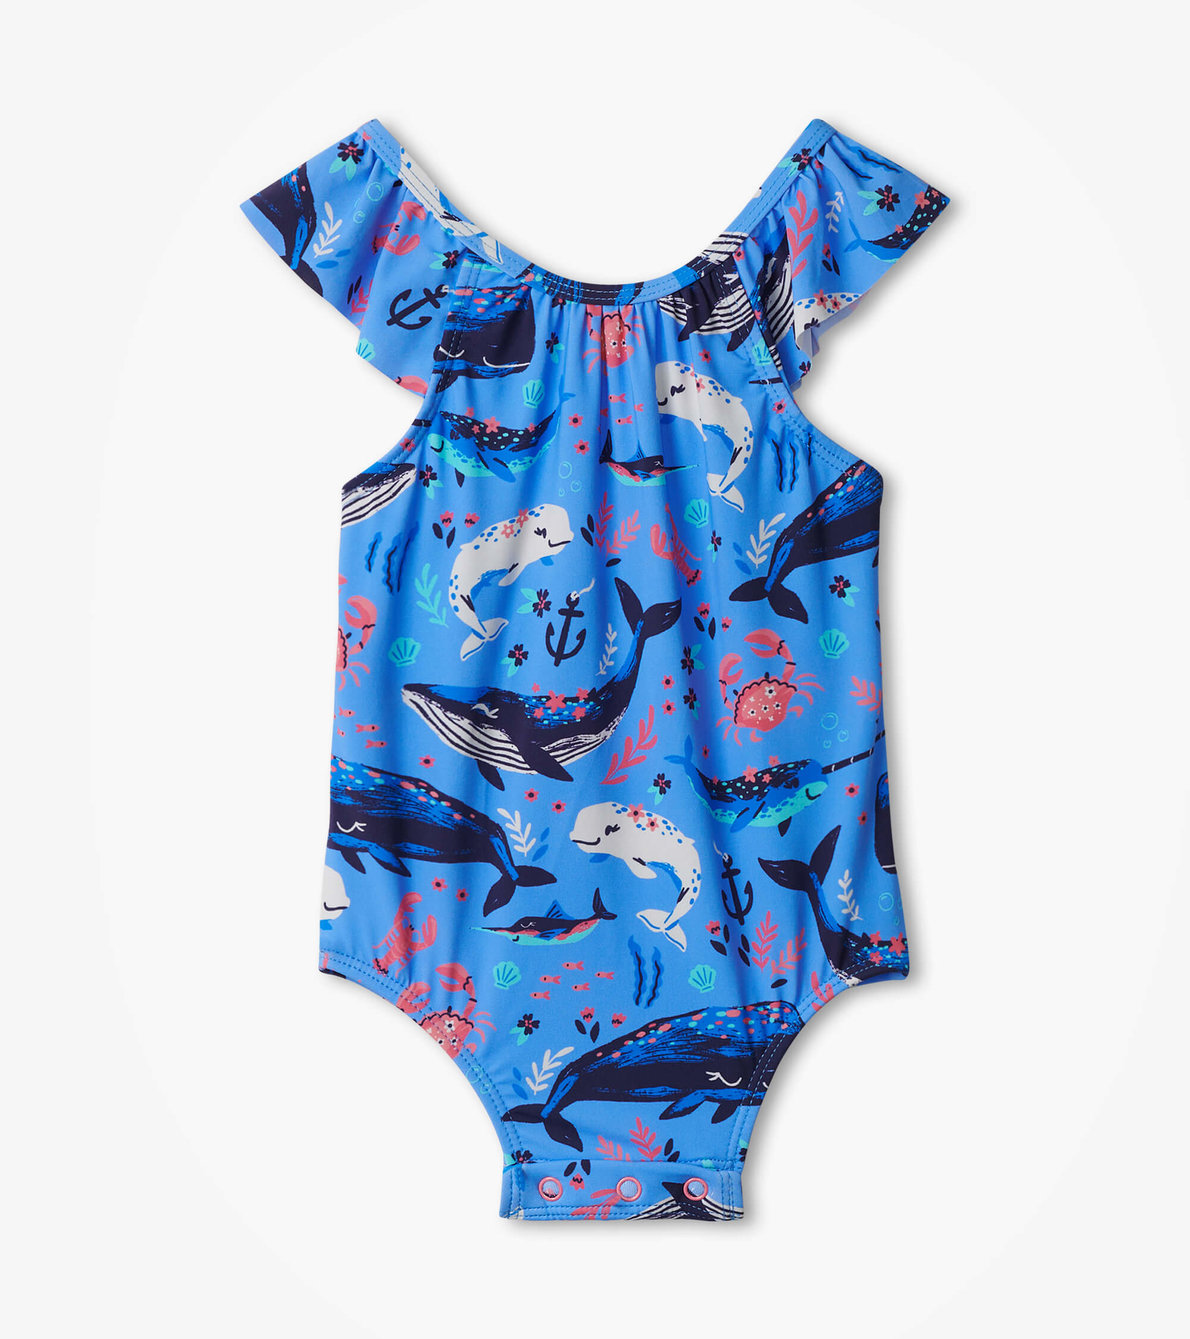 View larger image of Aquatic Friends Baby Ruffle Swimsuit